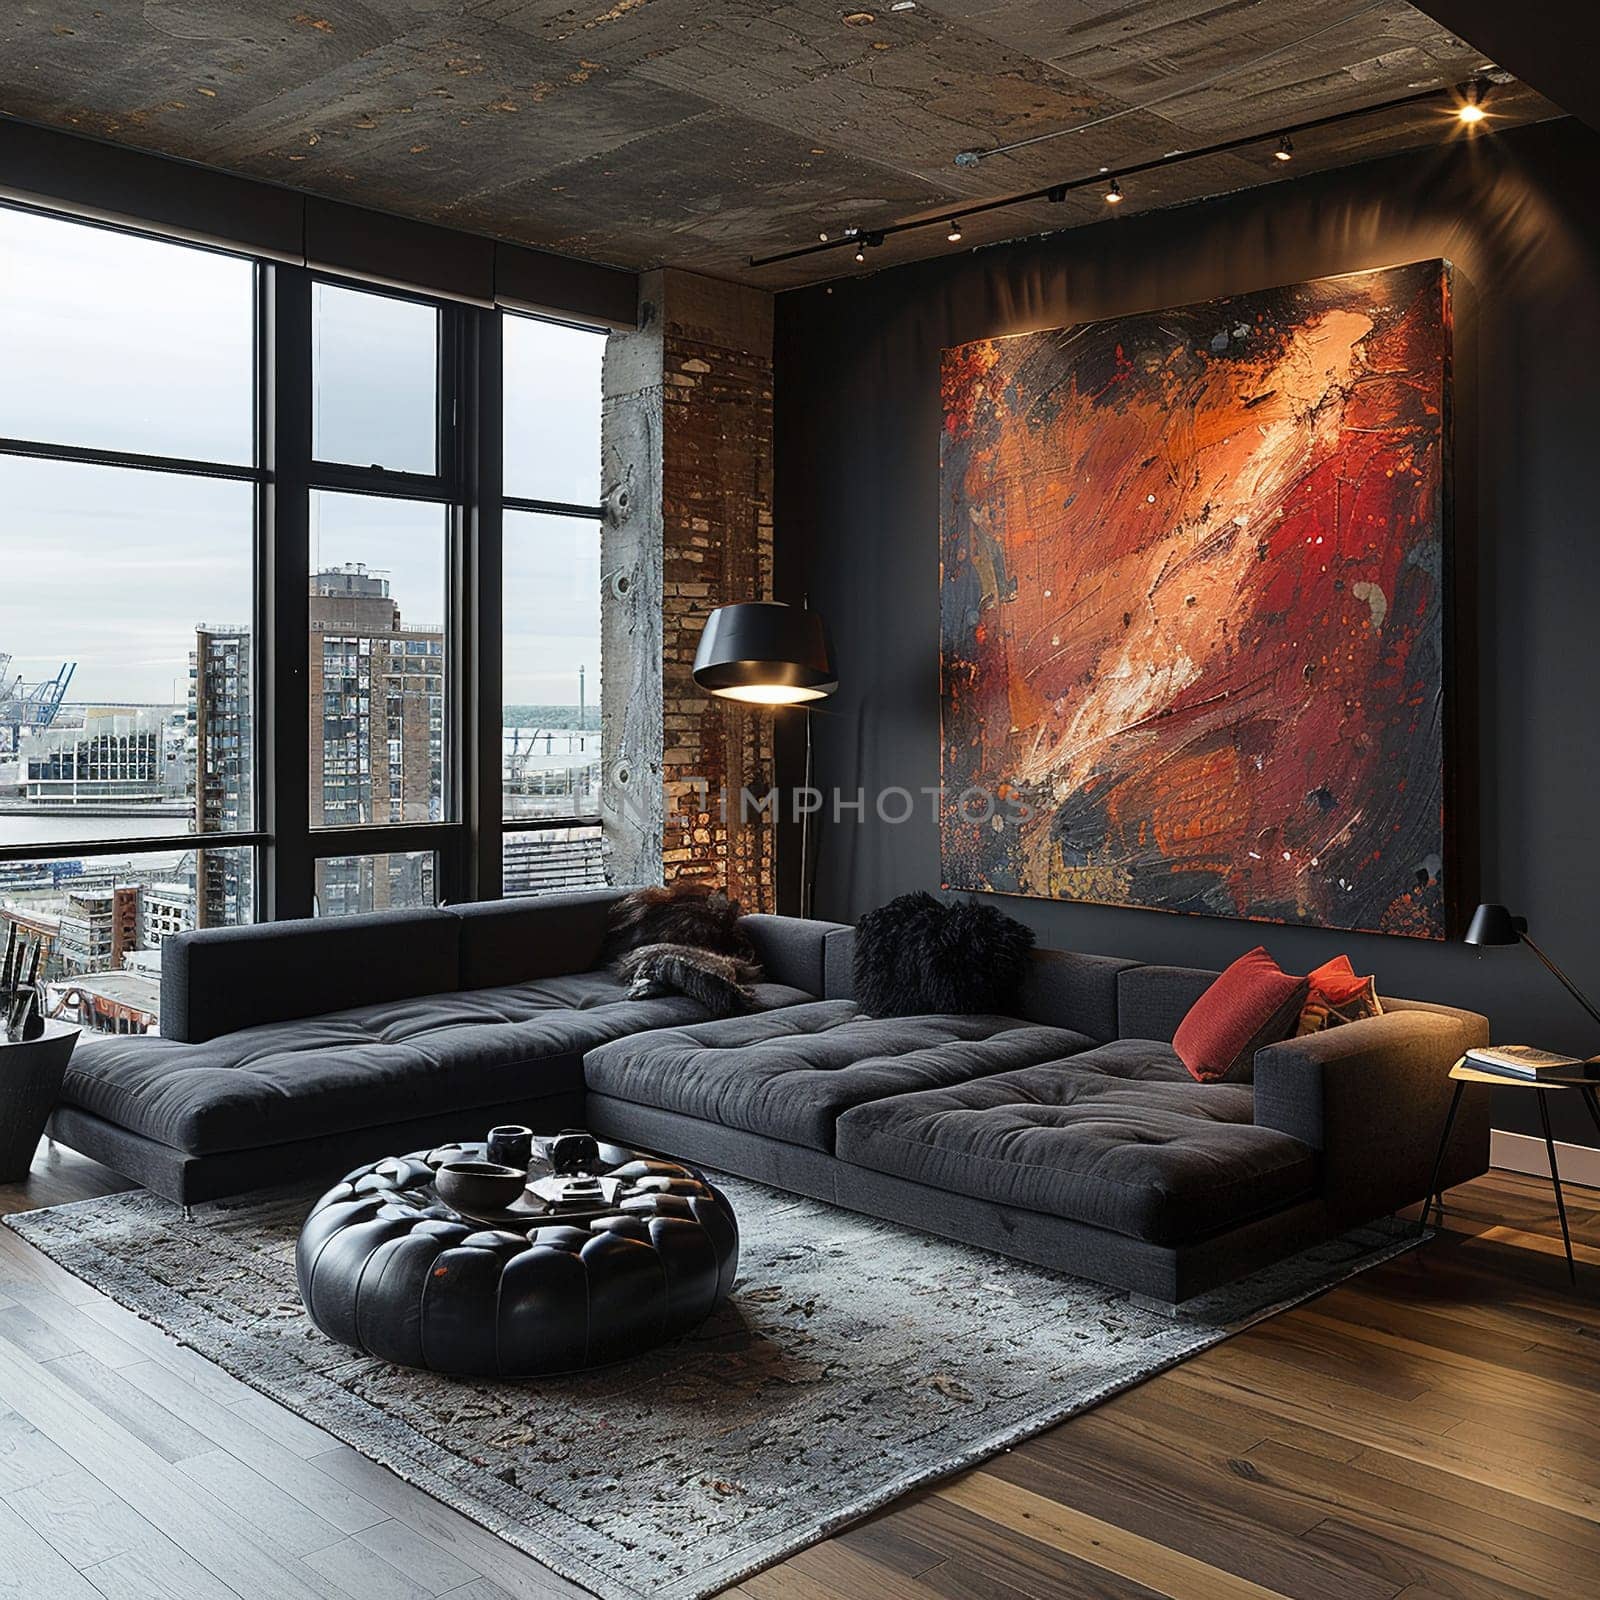 Sleek and stylish bachelor pad with modern art state-of-the-art tech by Benzoix